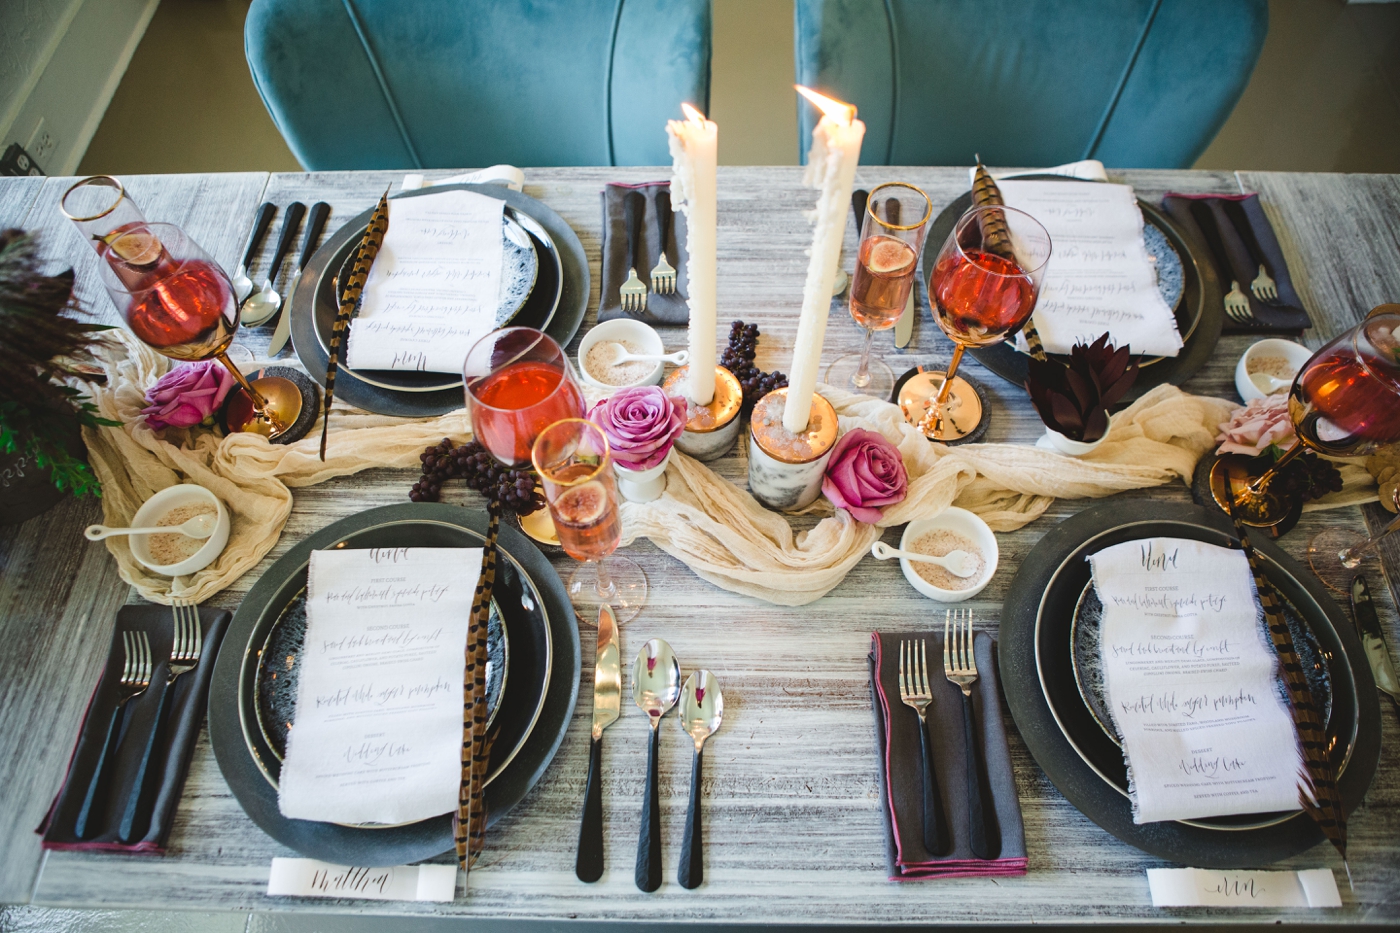 Dusty blue and burgundy Thanksgiving Dinner Inspiration by The Kings Cottage | Izzy + Co.